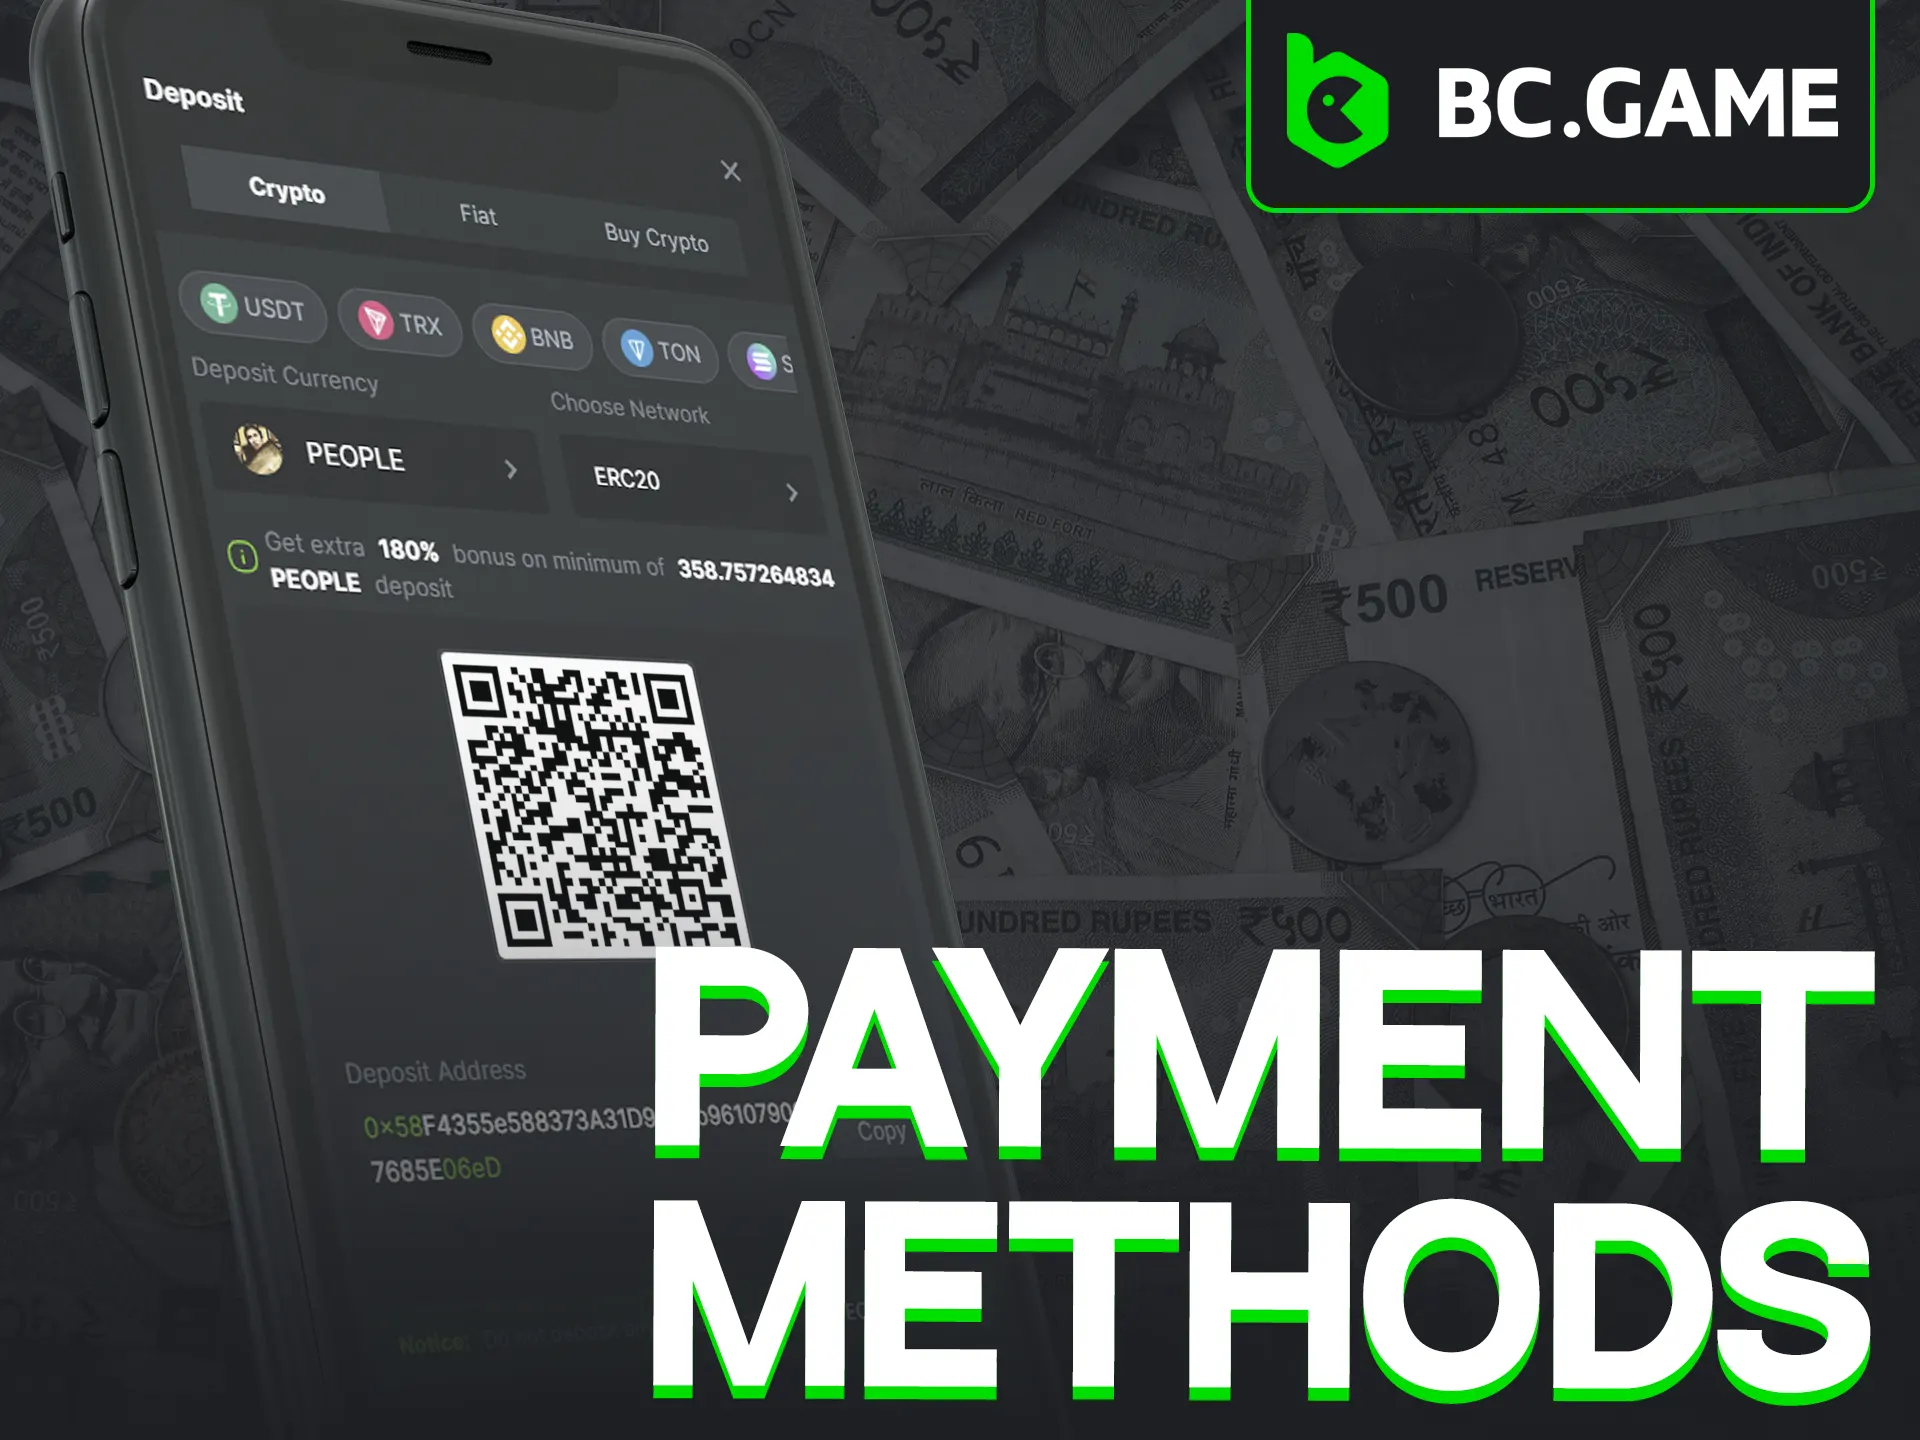 BC Game Casino App offers various payment methods.